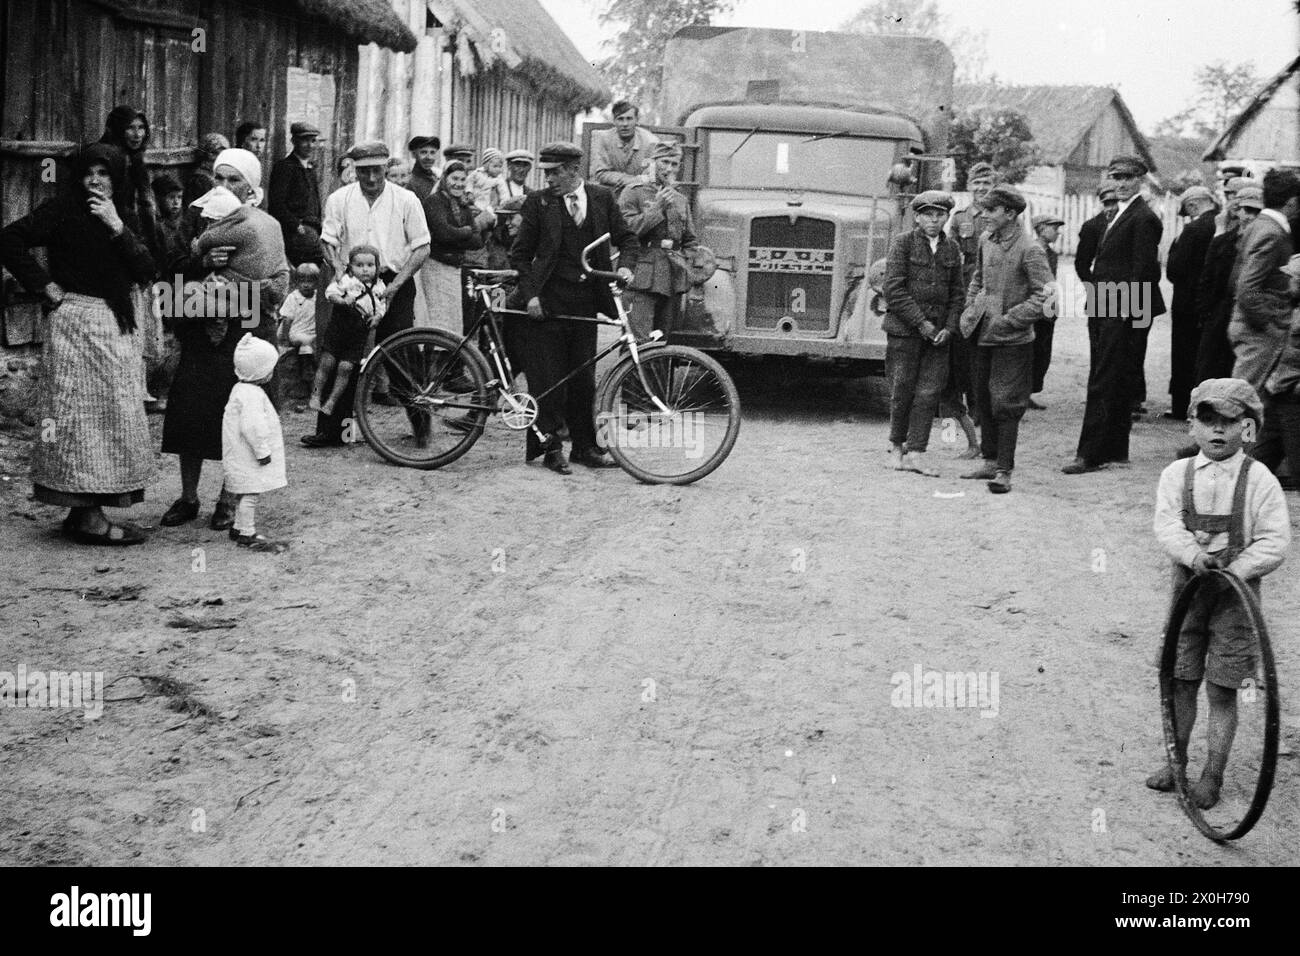 Villagers have gathered on the street. There are women, men and children. A boy is playing with a bicycle rim. Wehrmacht soldiers stand around their truck smoking. The picture was taken by a member of the Radfahrgrenadierregiment 2 / Radfahrsicherungsregiment 2, on the Eastern Front. Presumably during the advance in the summer of 1941 [automated translation] Stock Photo